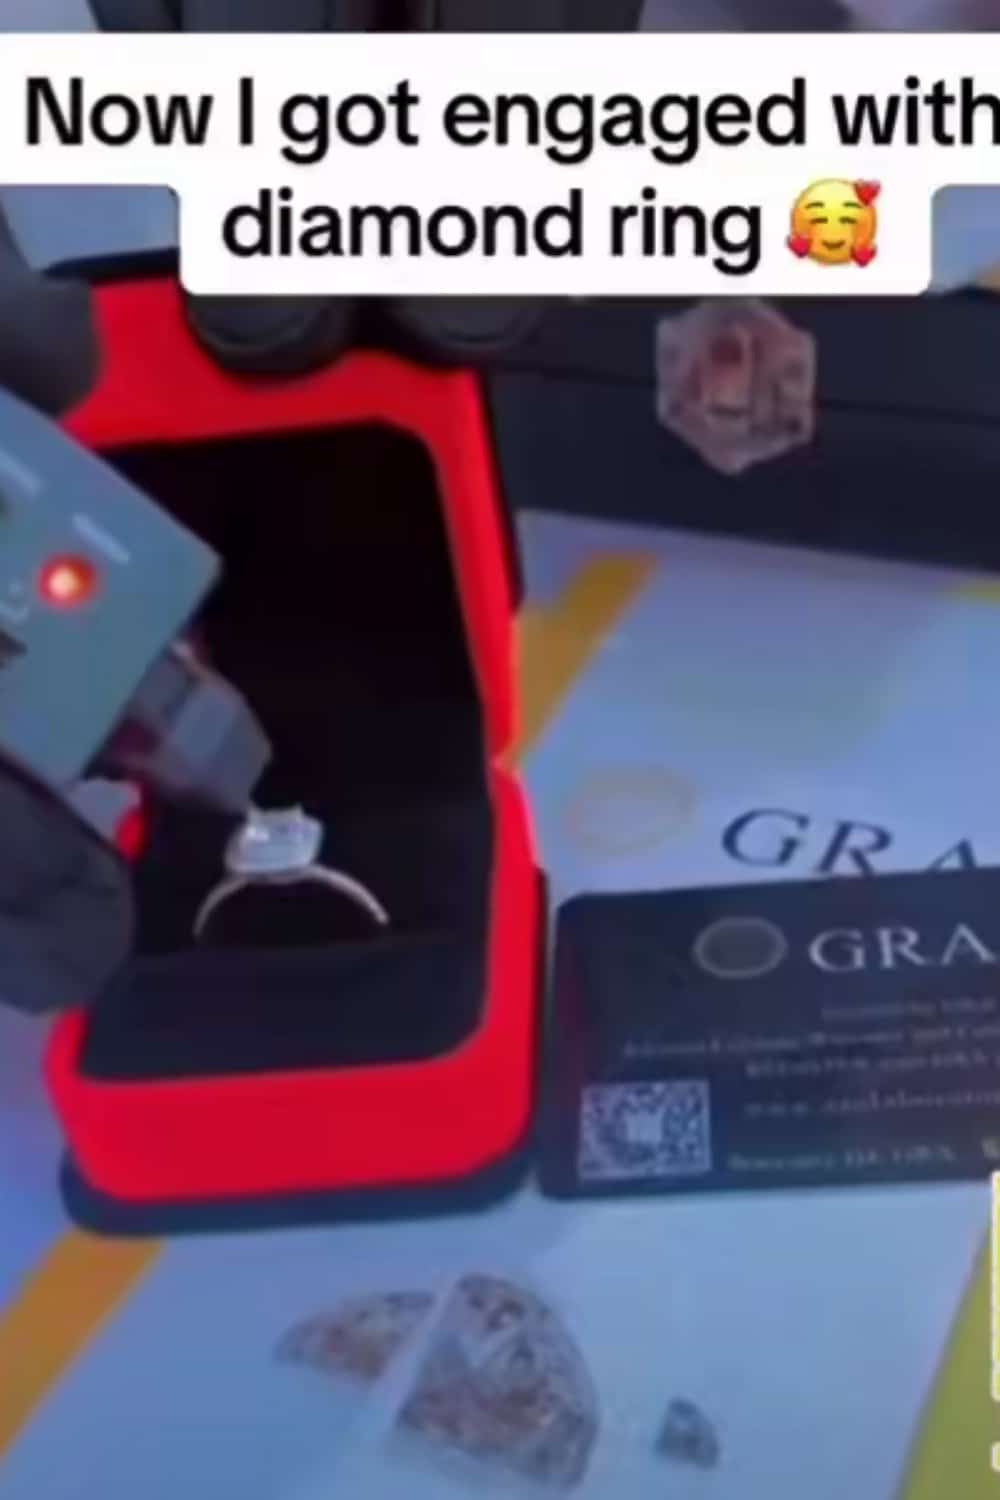 "A love worth waiting for" - Man surprises girlfriend with diamond ring after 6 years of hustling together (Video)